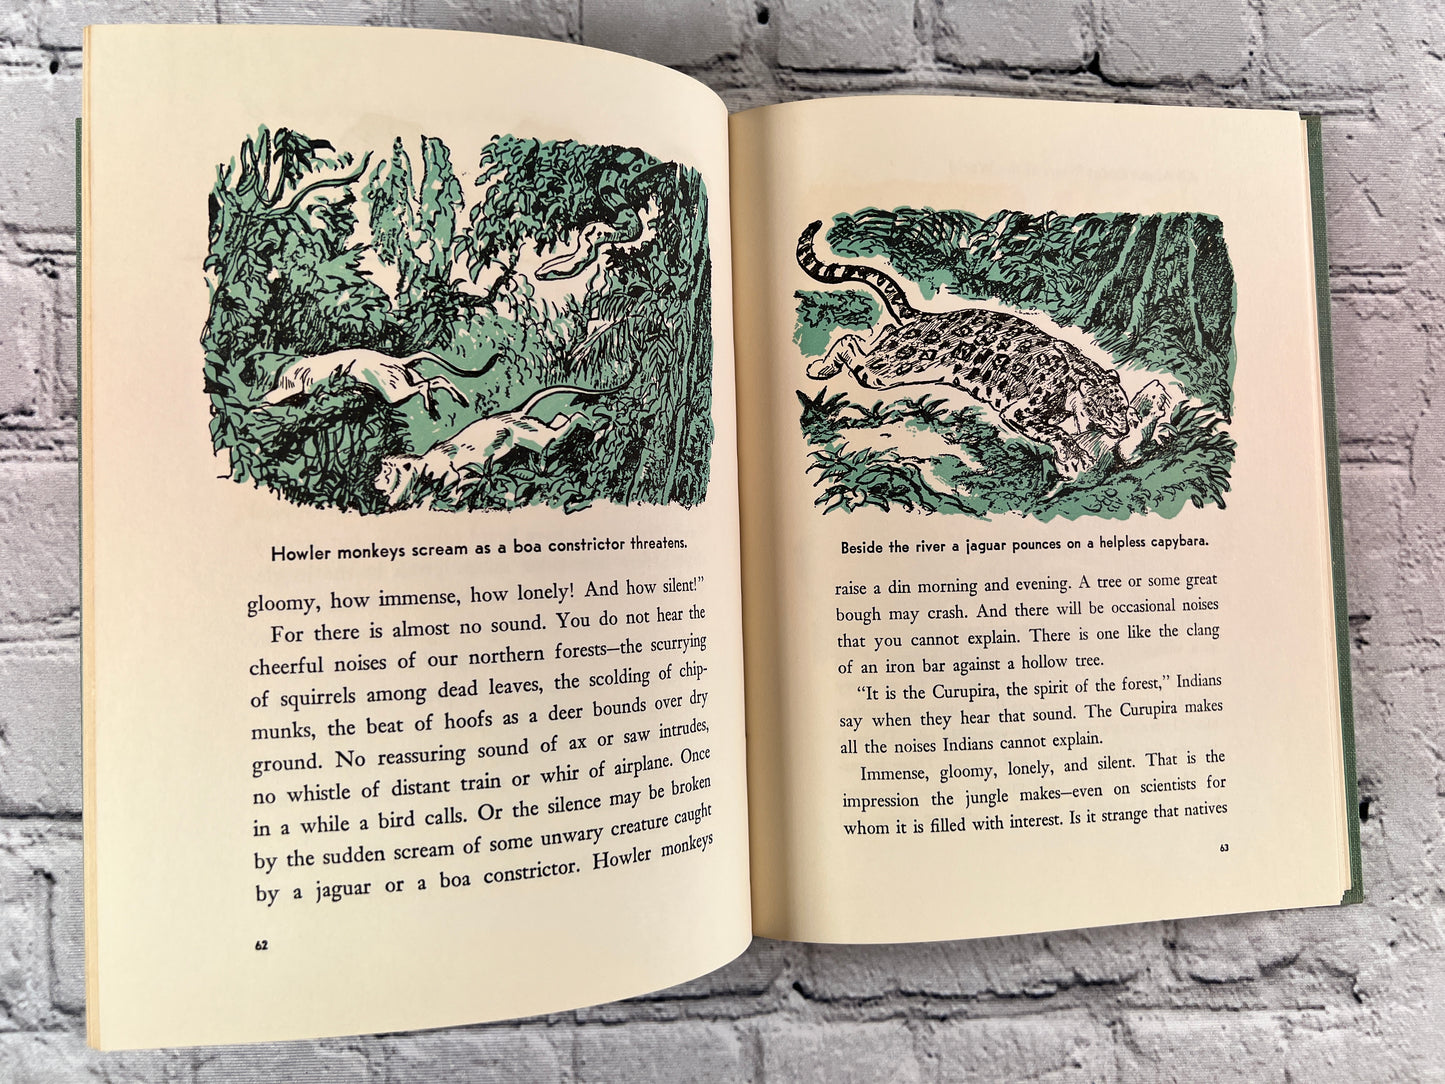 All About Books 22. All About Great Rivers of the World by Anne Terry White [1957 · 3rd Print]